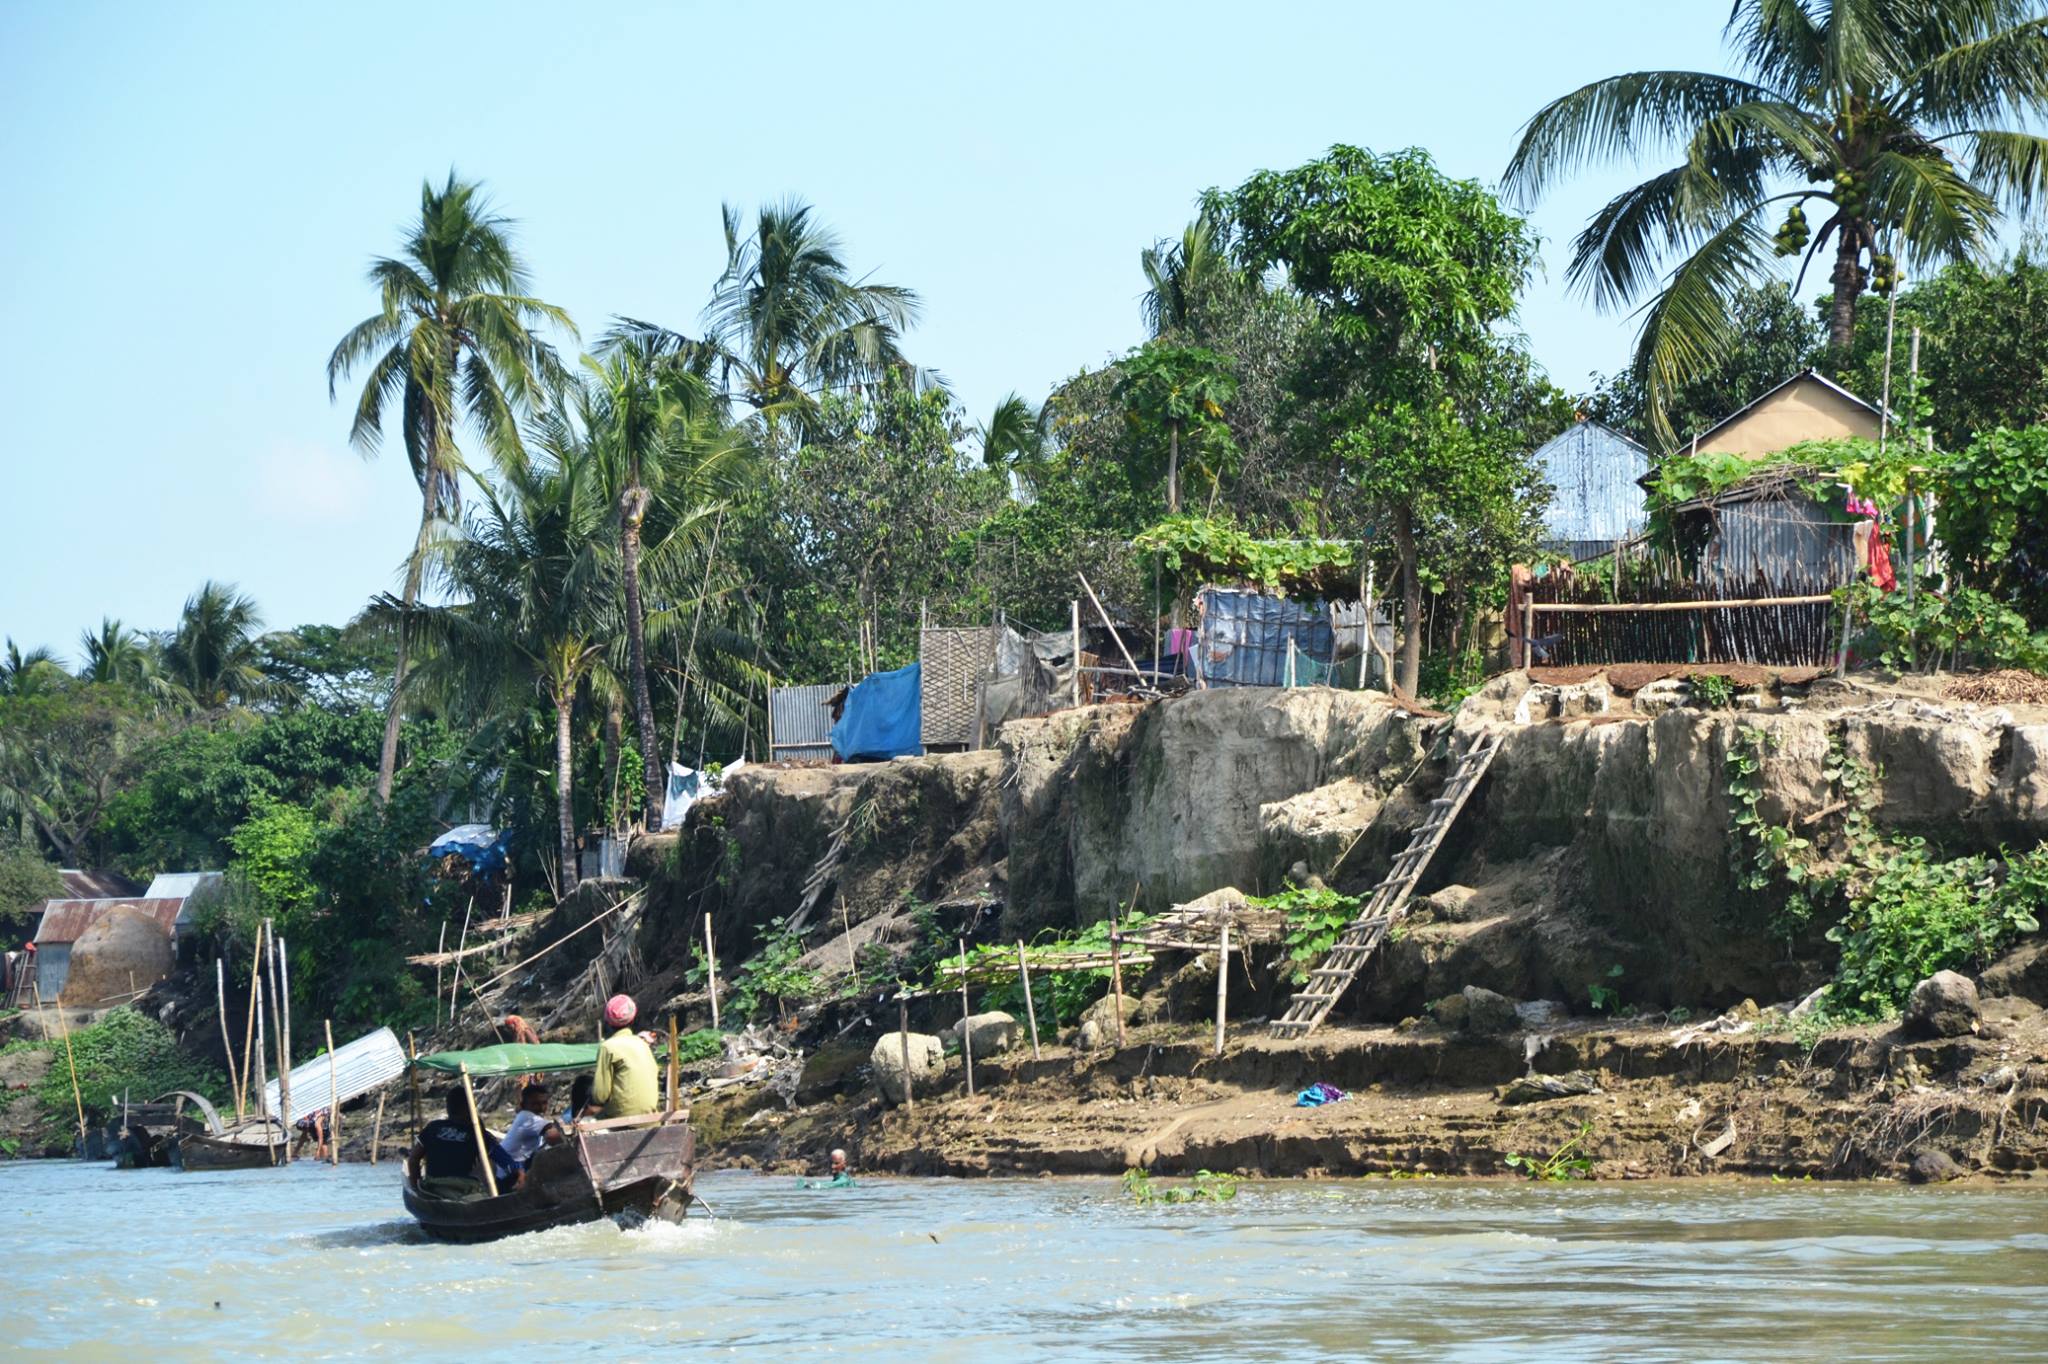 Many coastal villages in Bangladesh have had to learn how to live with the cyclones. Credit: Sonja Ayeb-Karlsson